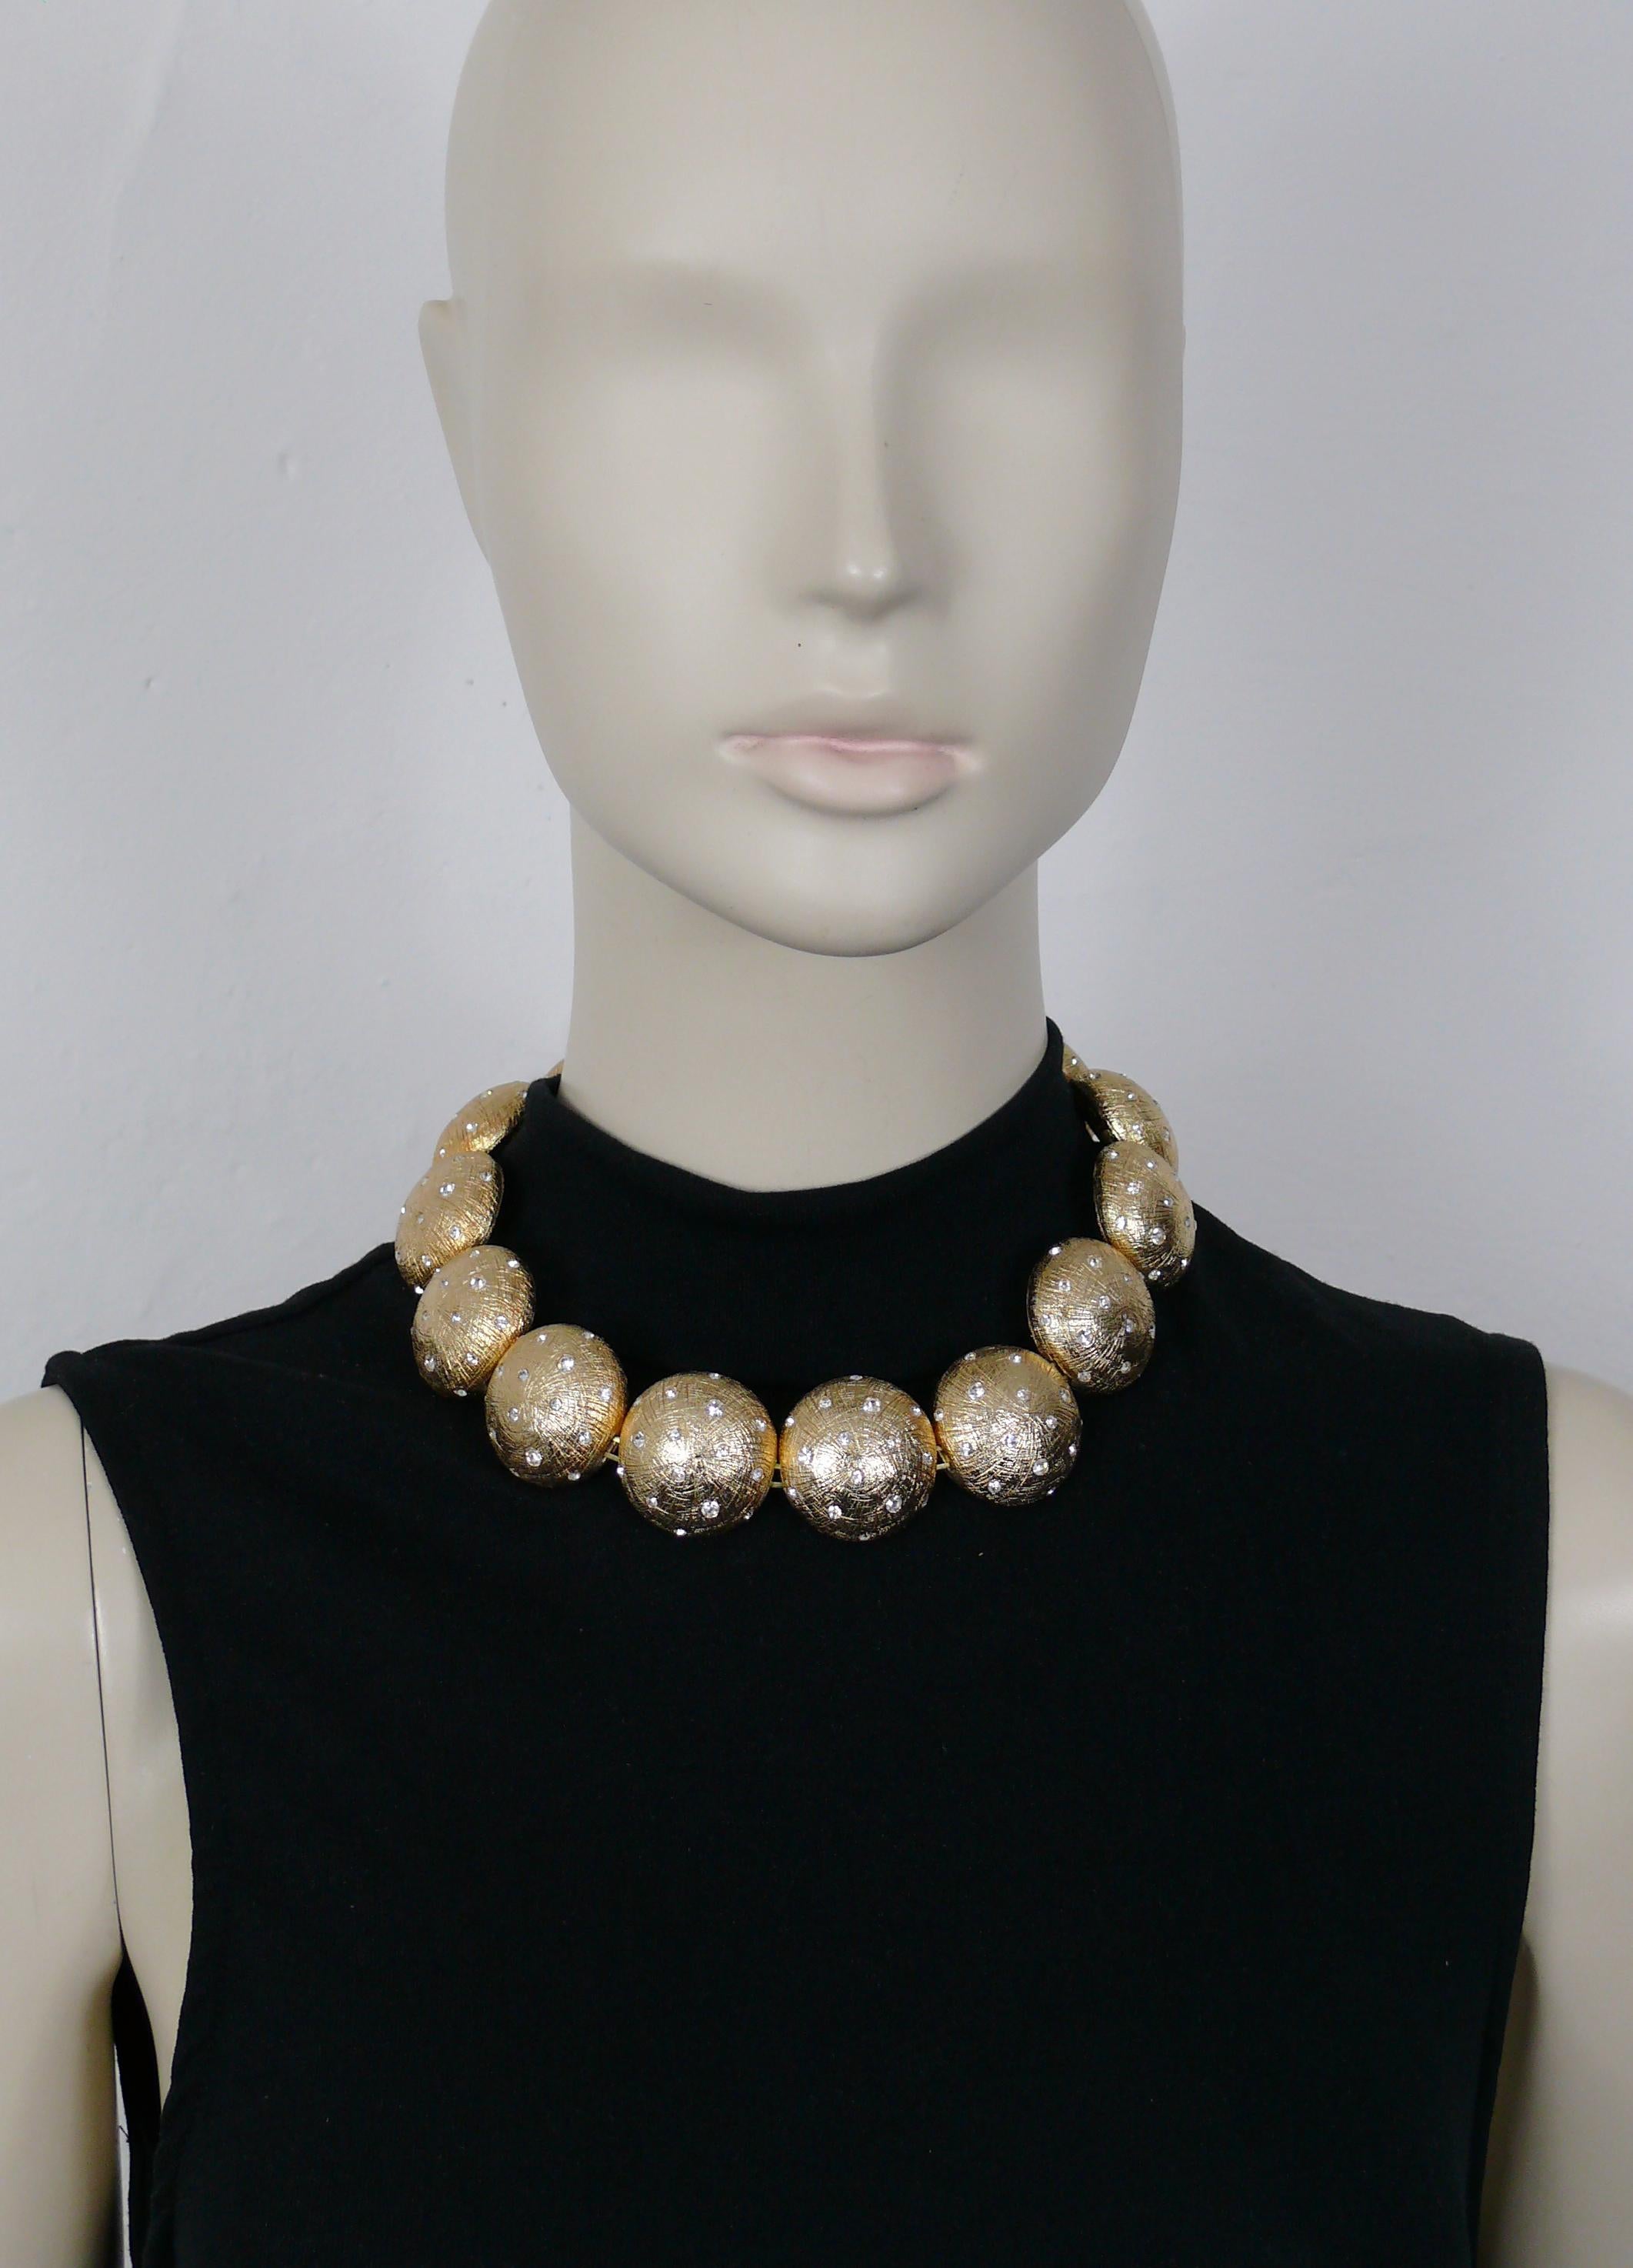 CHRISTIAN DIOR vintage starlight necklace featuring textured gold toned celestial dome links embellished with clear crystals simulating brighting stars.

Adjustable hook clasp closure.

Embossed CHR. DIOR Germany.

Indicative measurements :